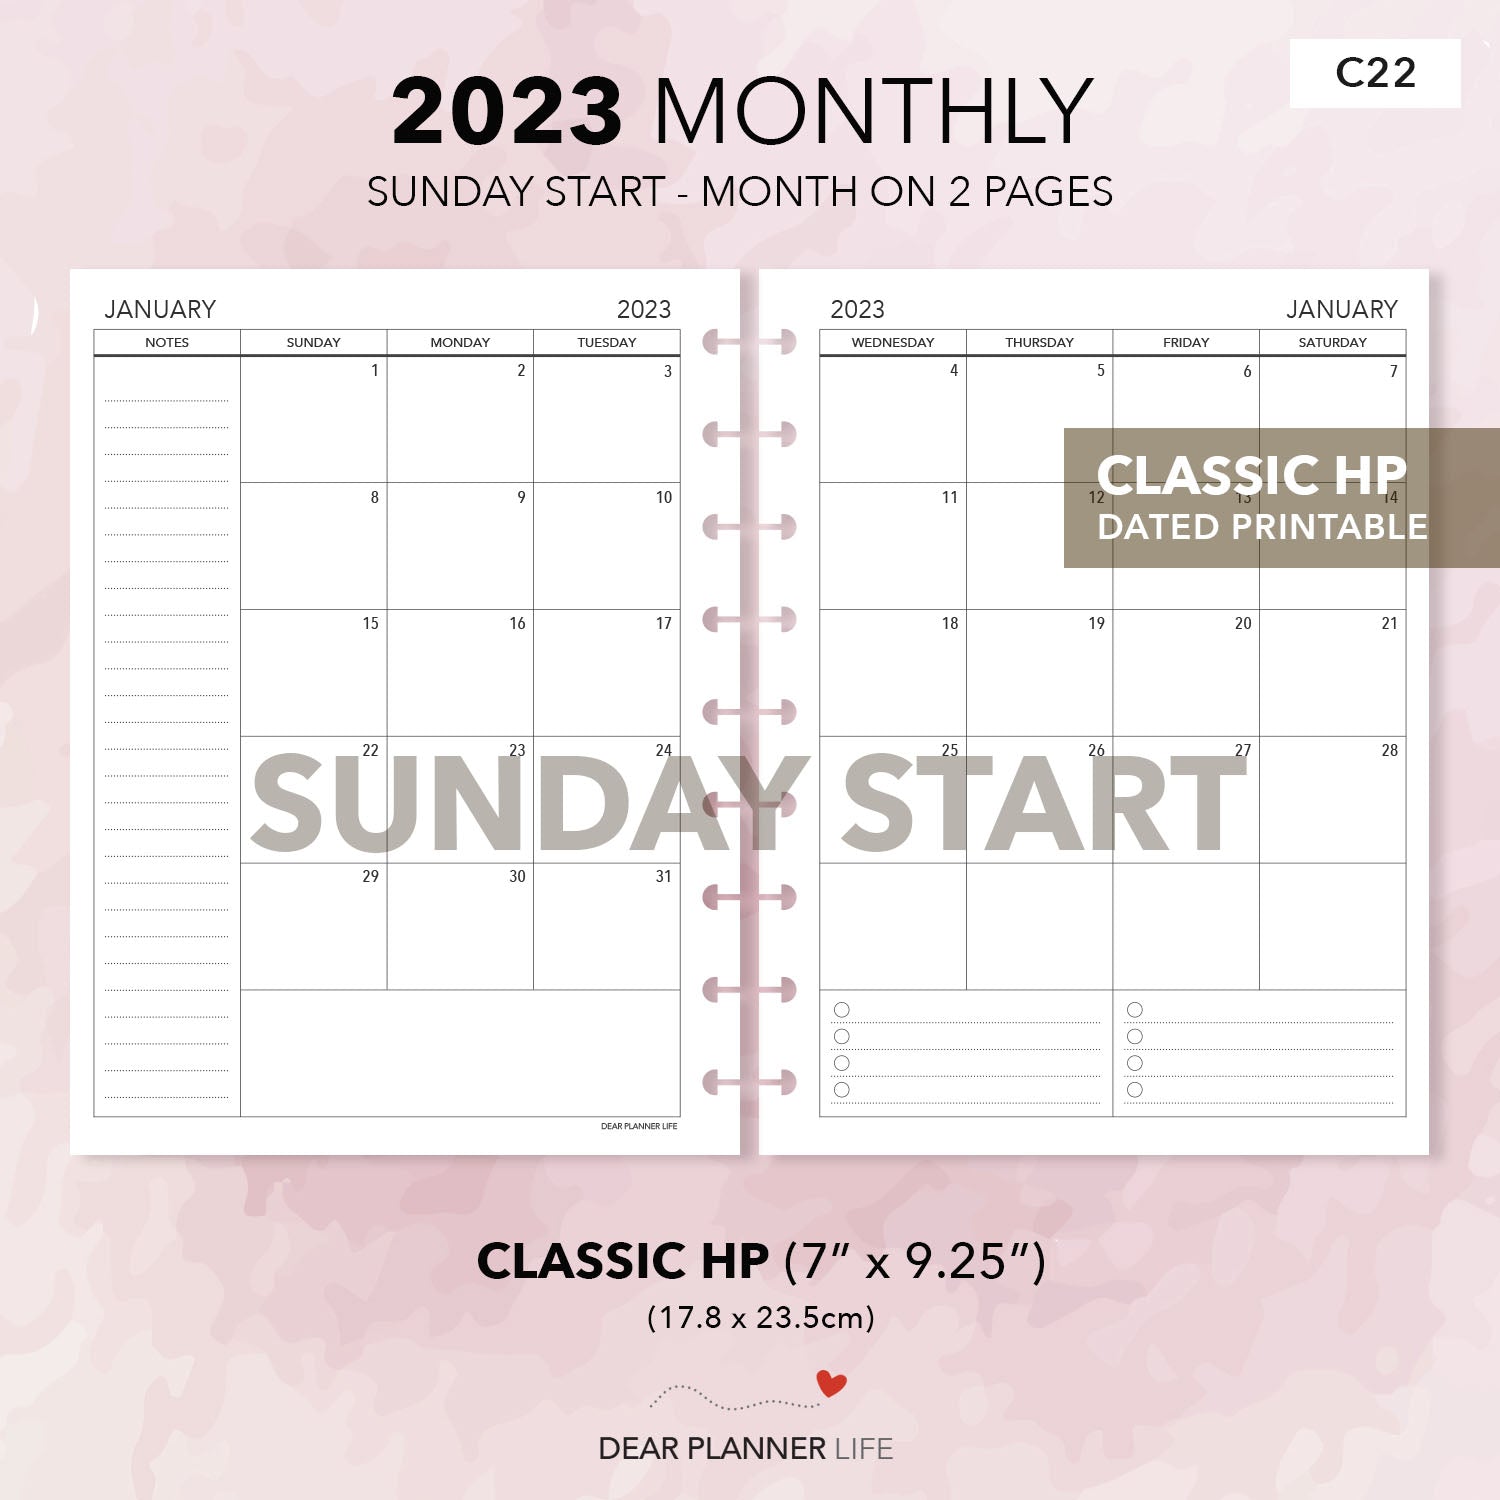 2023 Calendar - Sunday Start, Month On 2 Pages (Classic Hp) Printable –  Dearplannerlife